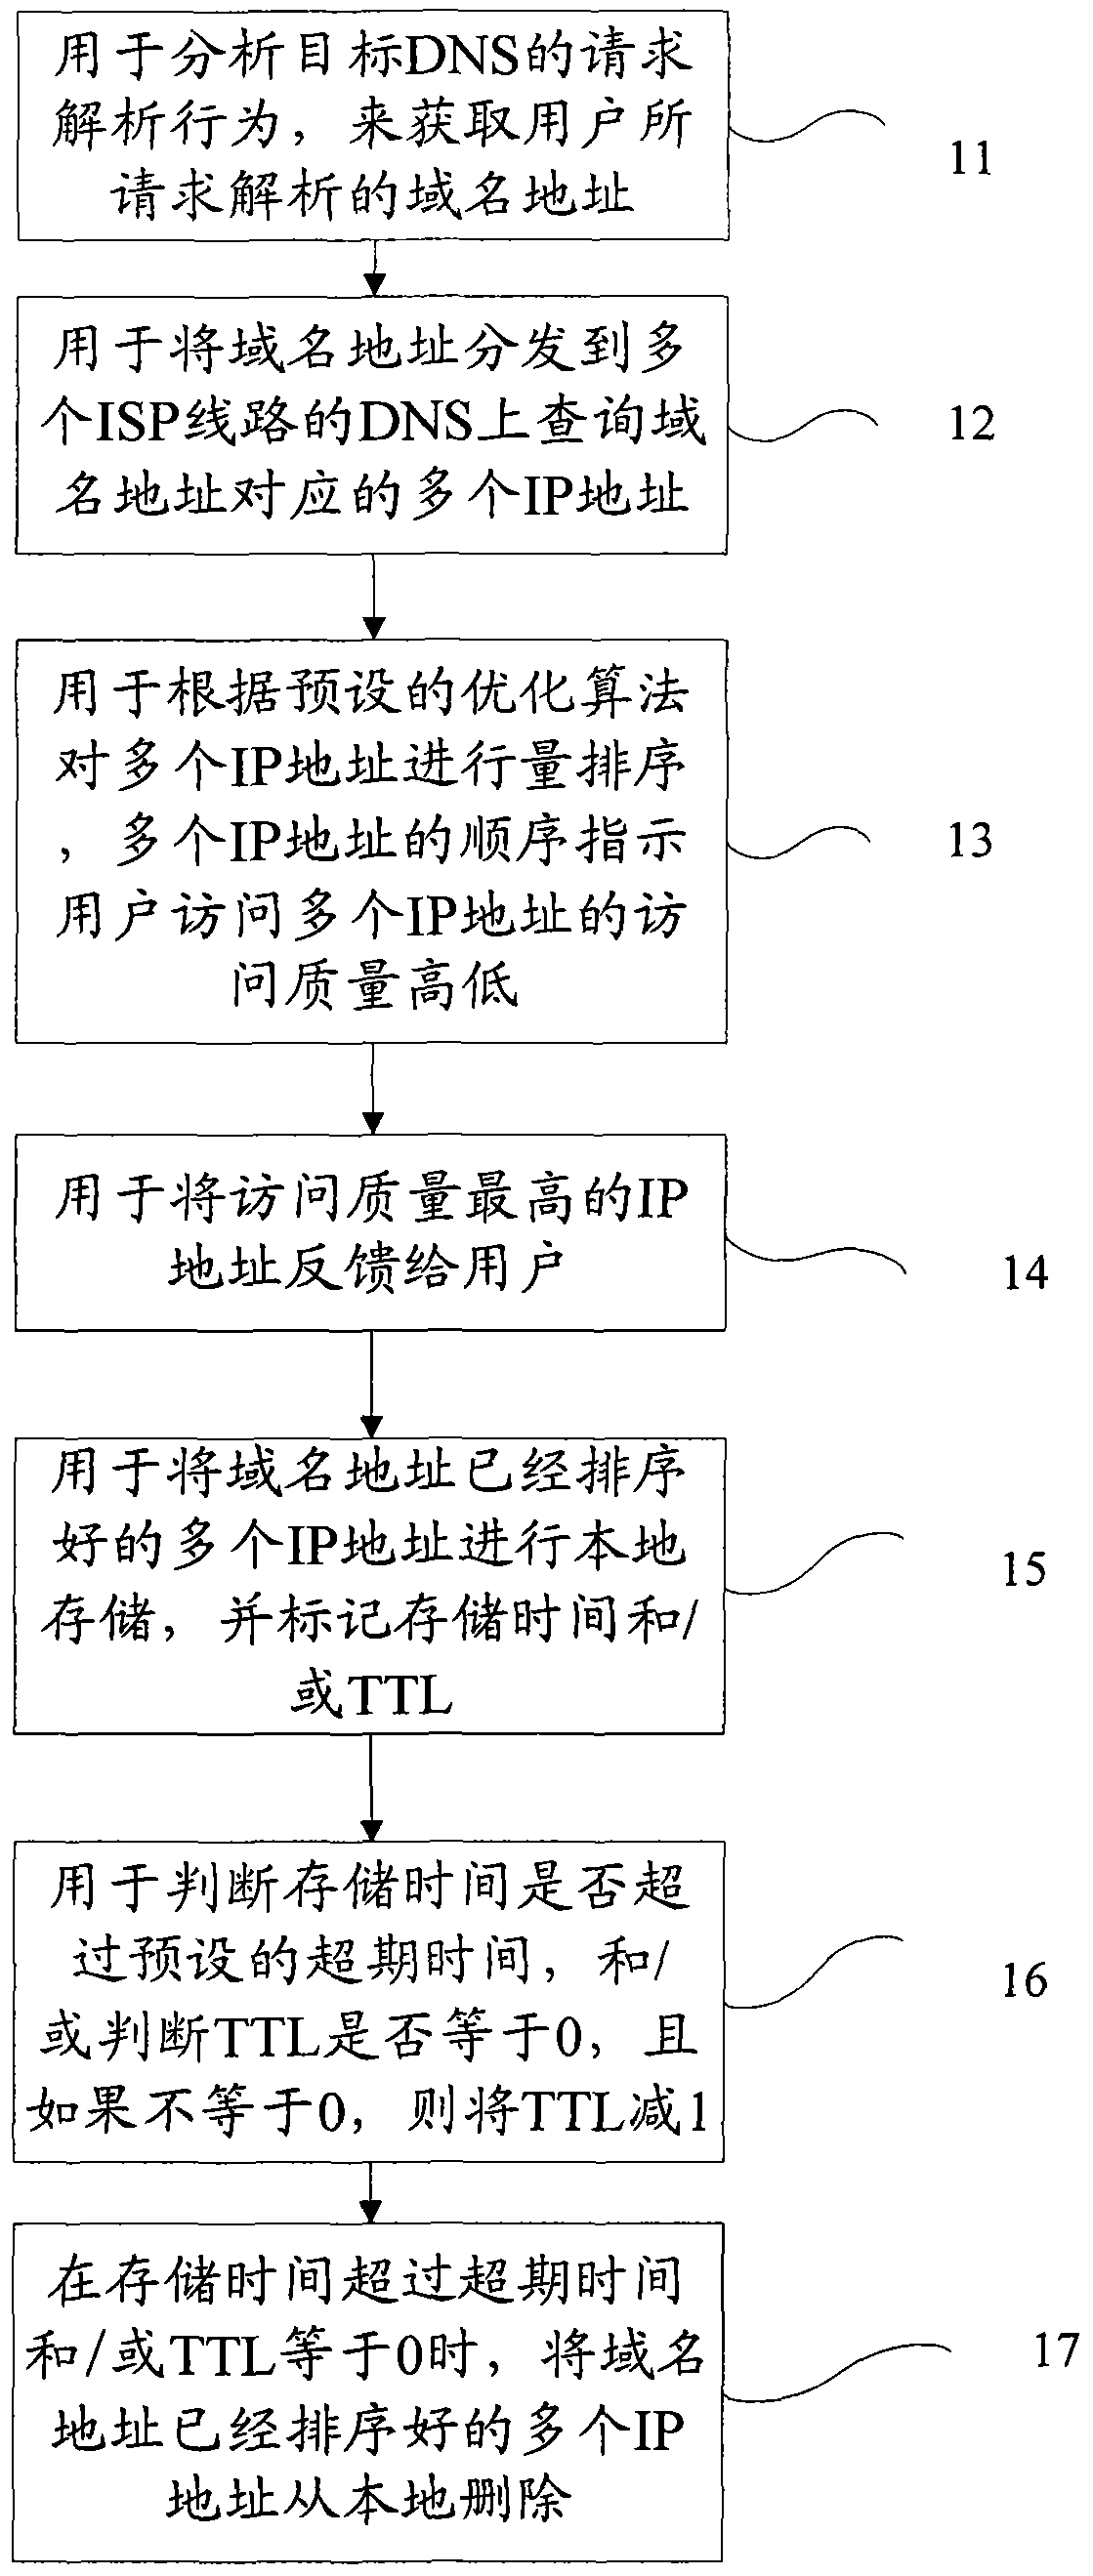 Optimal access flow scheduling method based on DNS (Domain Name System) and optimal access flow scheduling equipment based on DNS